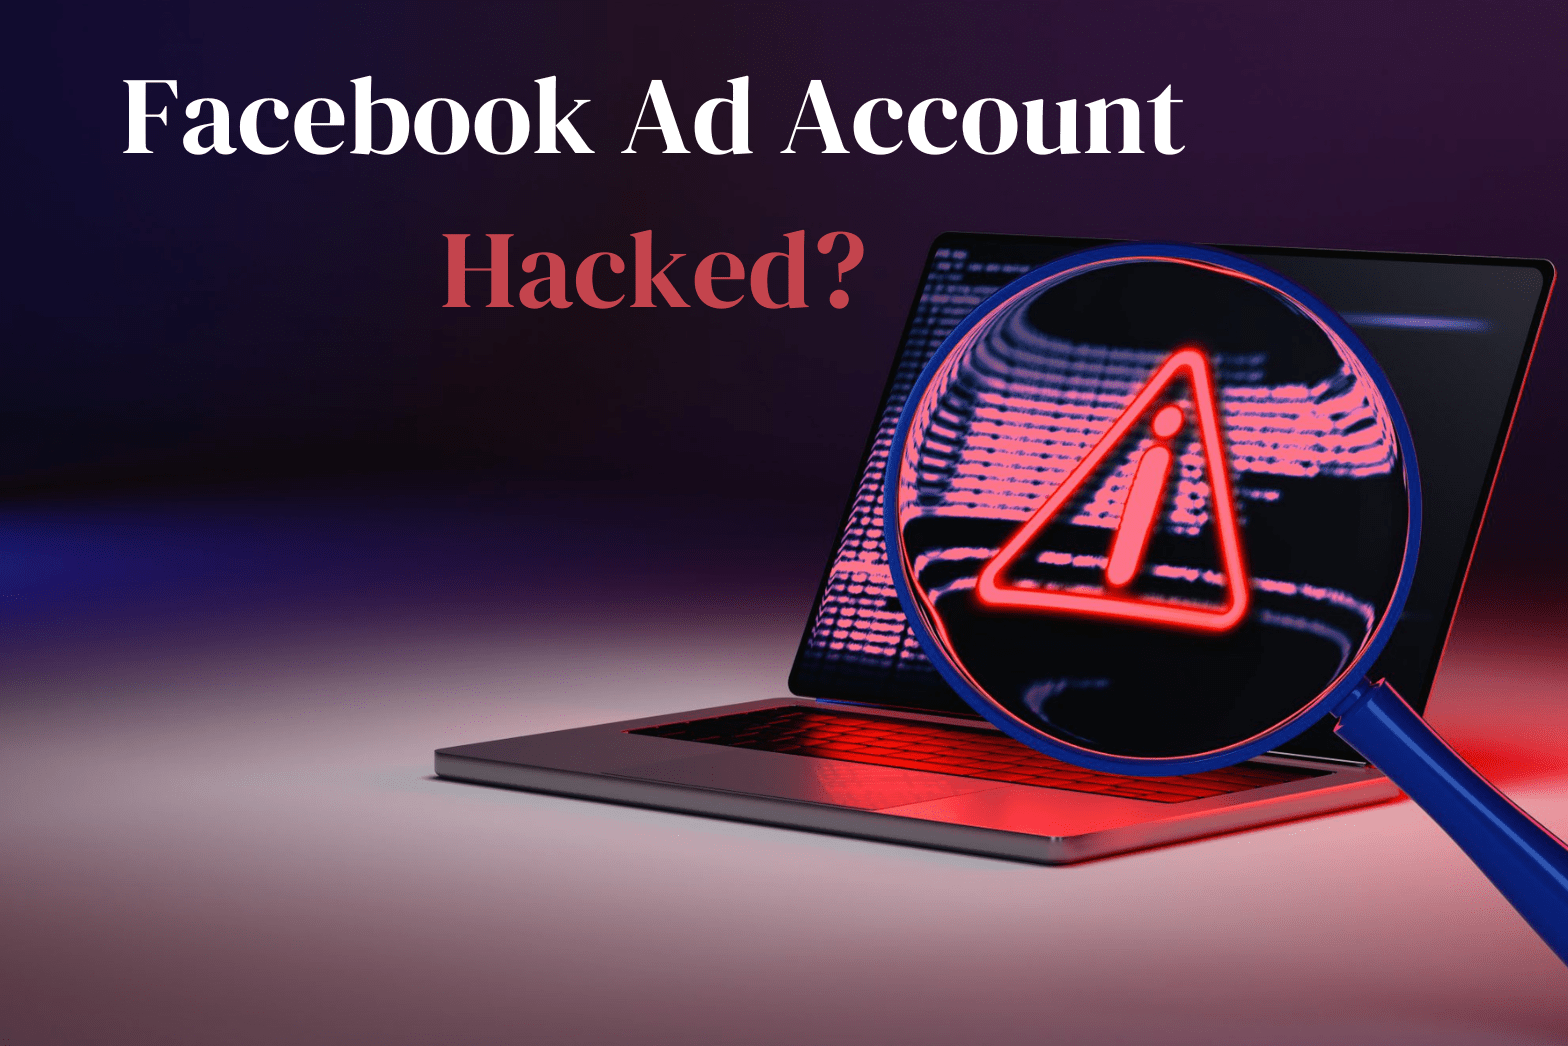 What to Do Immediately If Your Facebook Ad Account Is Hacked